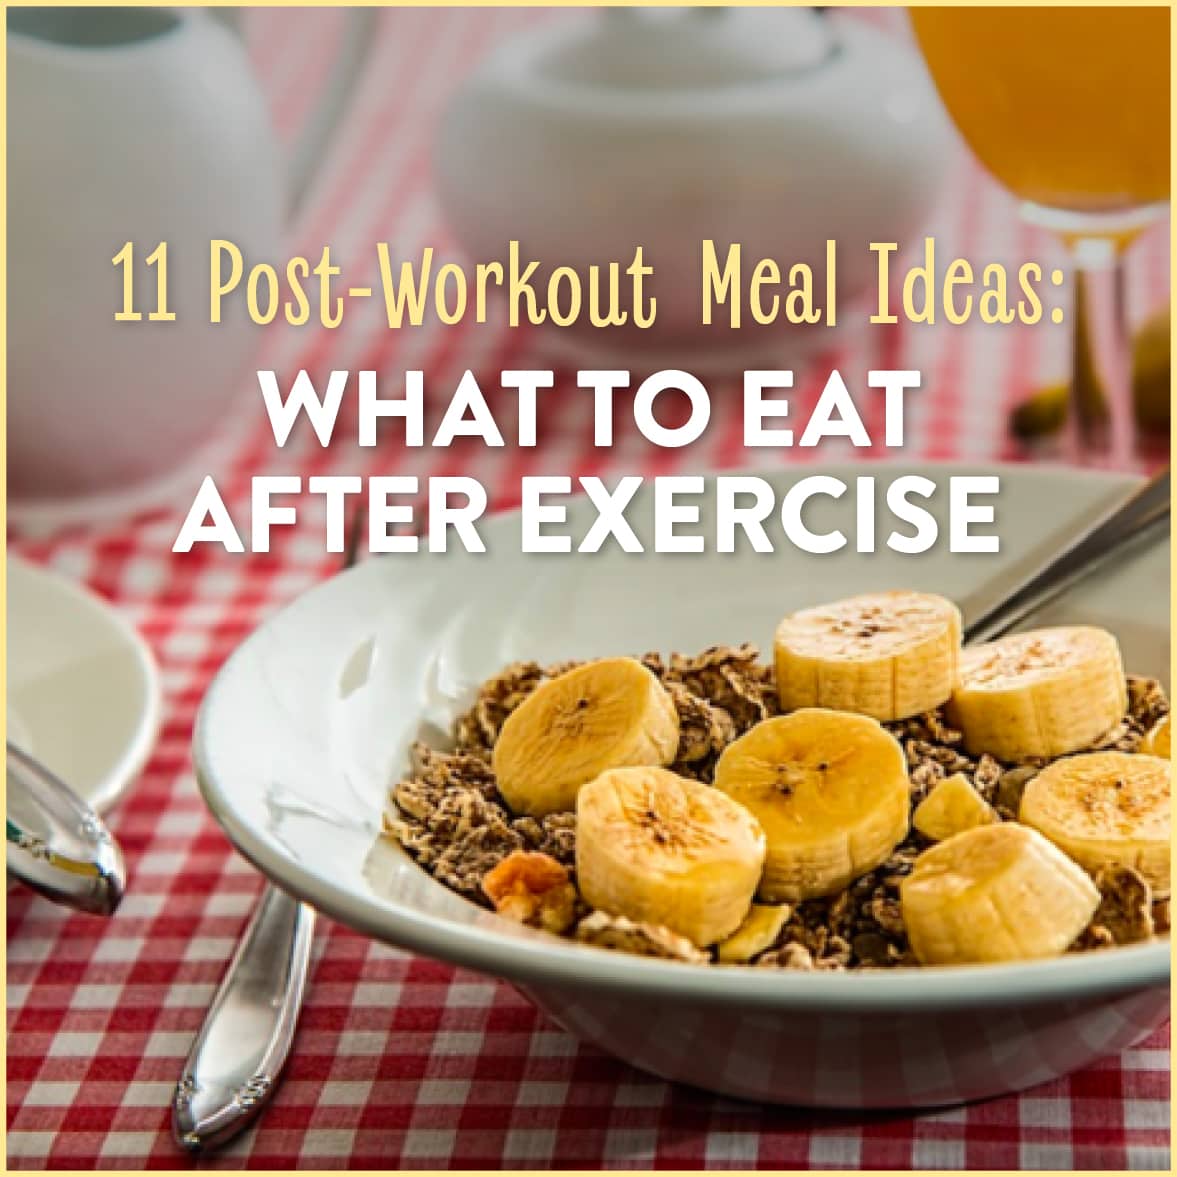 11 Post-Workout Meal Ideas: What to Eat After Exercise